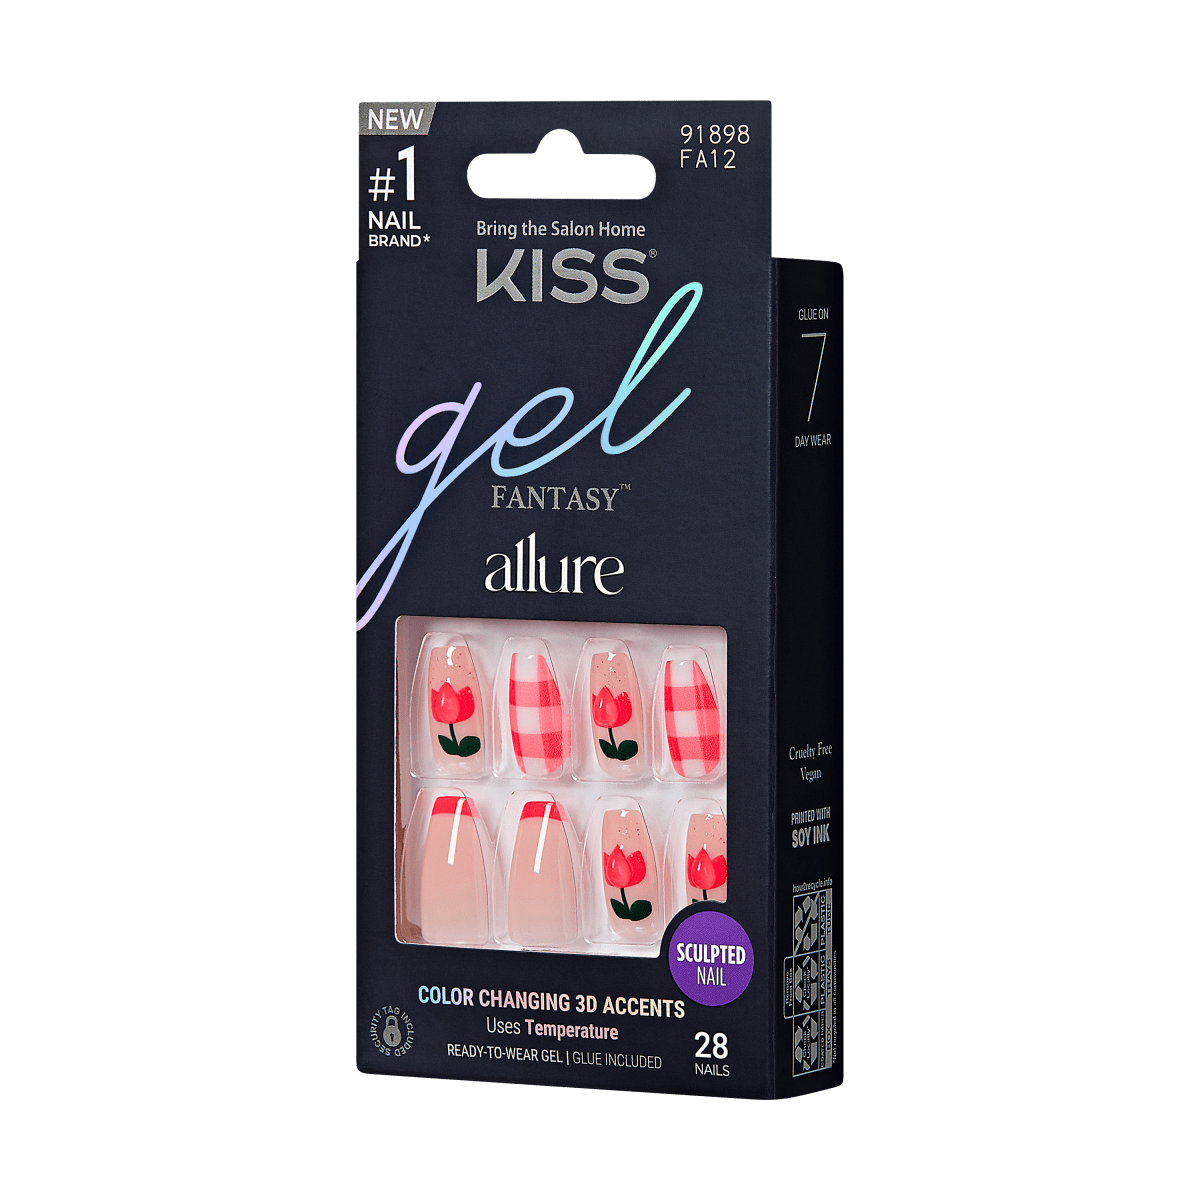 KISS Gel Fantasy Allure Press-On Nails, All Yours, Pink, Medium